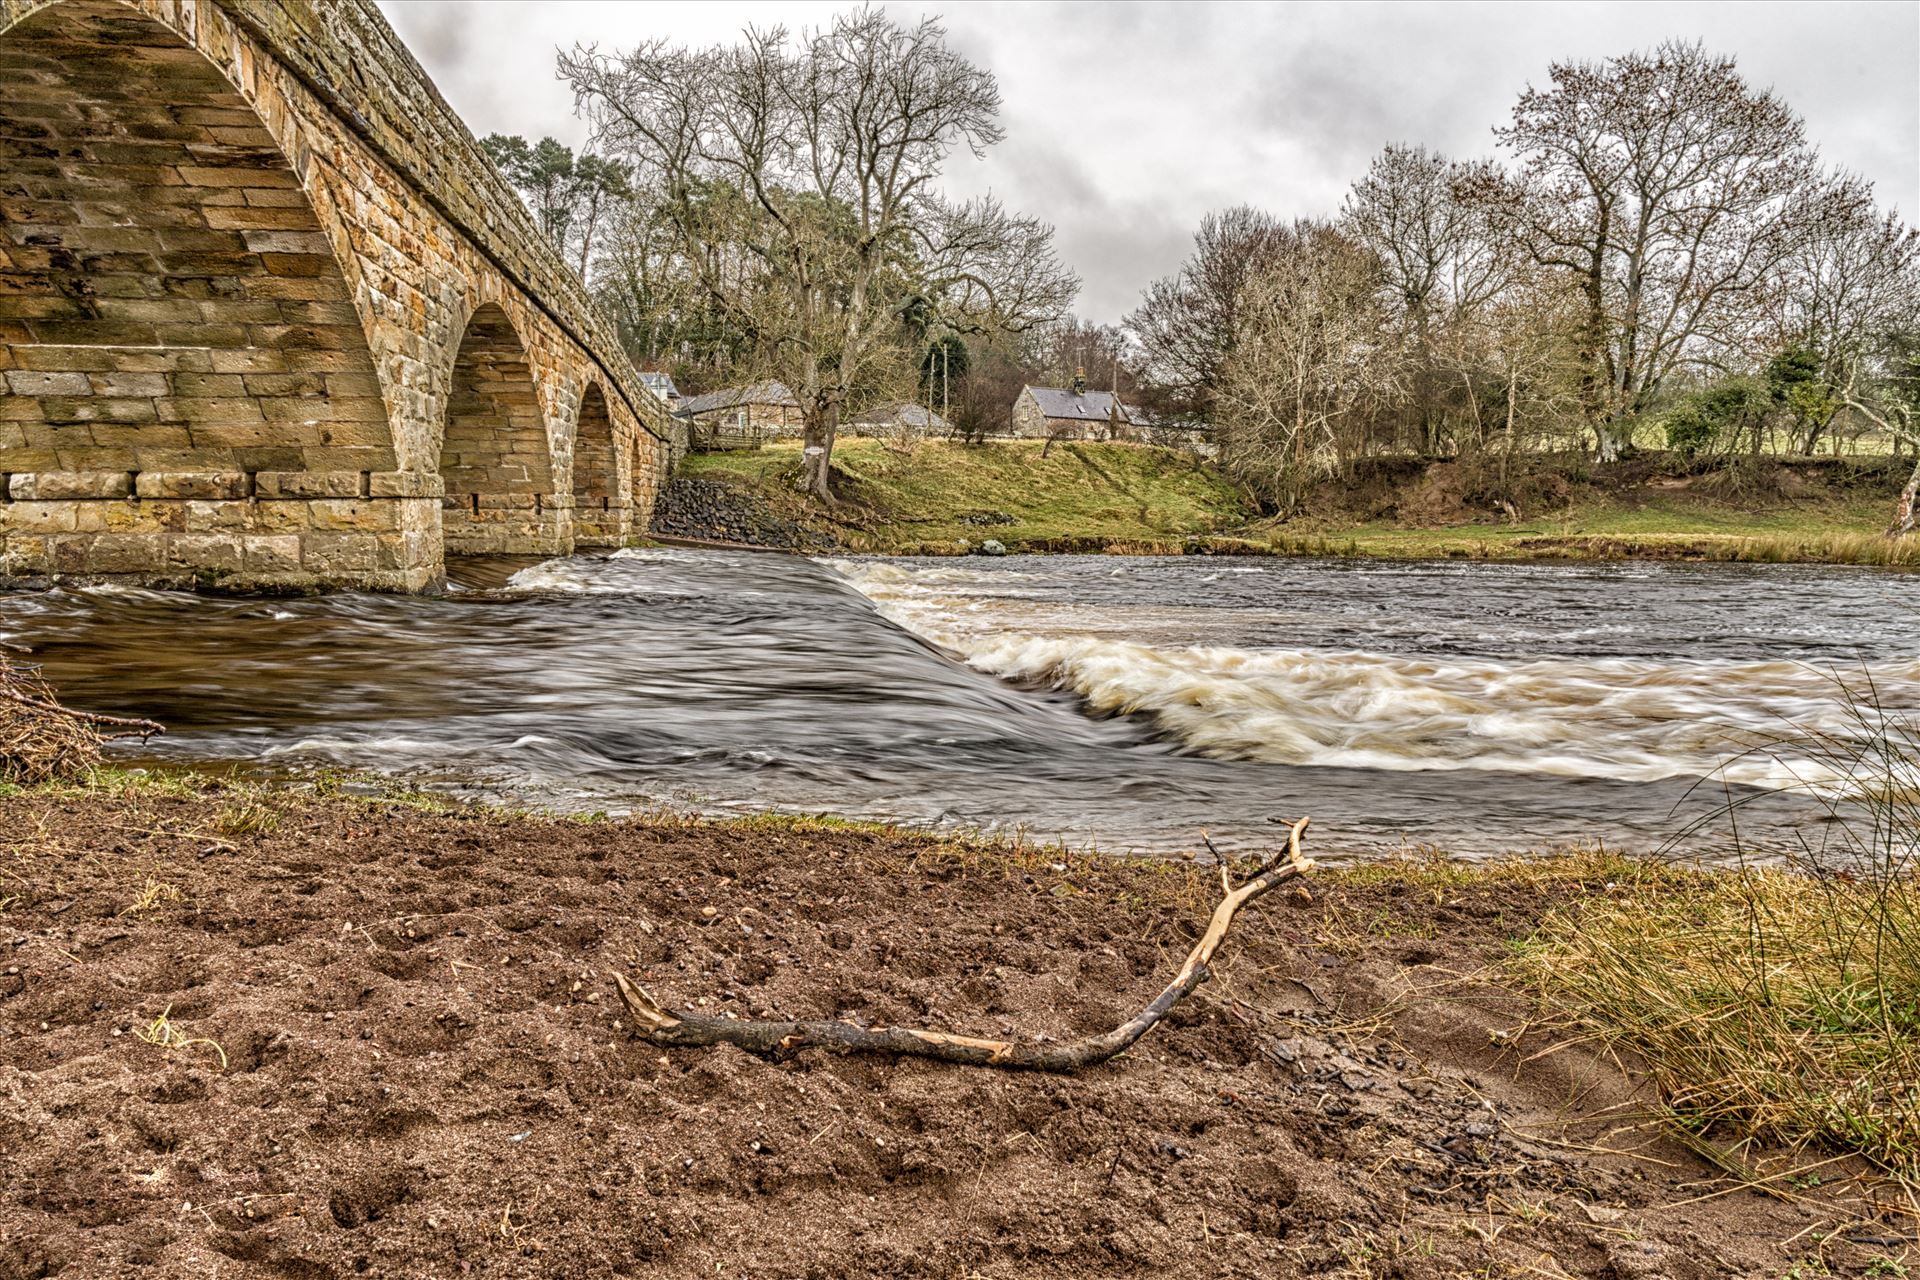 Paperhaugh Bridge, nr Rothbury - This is an old bridge built by the Duke of Northumberland and then adopted by the County in 1888. It spans the River Coquet at Paperhaugh, nr Rothbury, Northumberland. by philreay